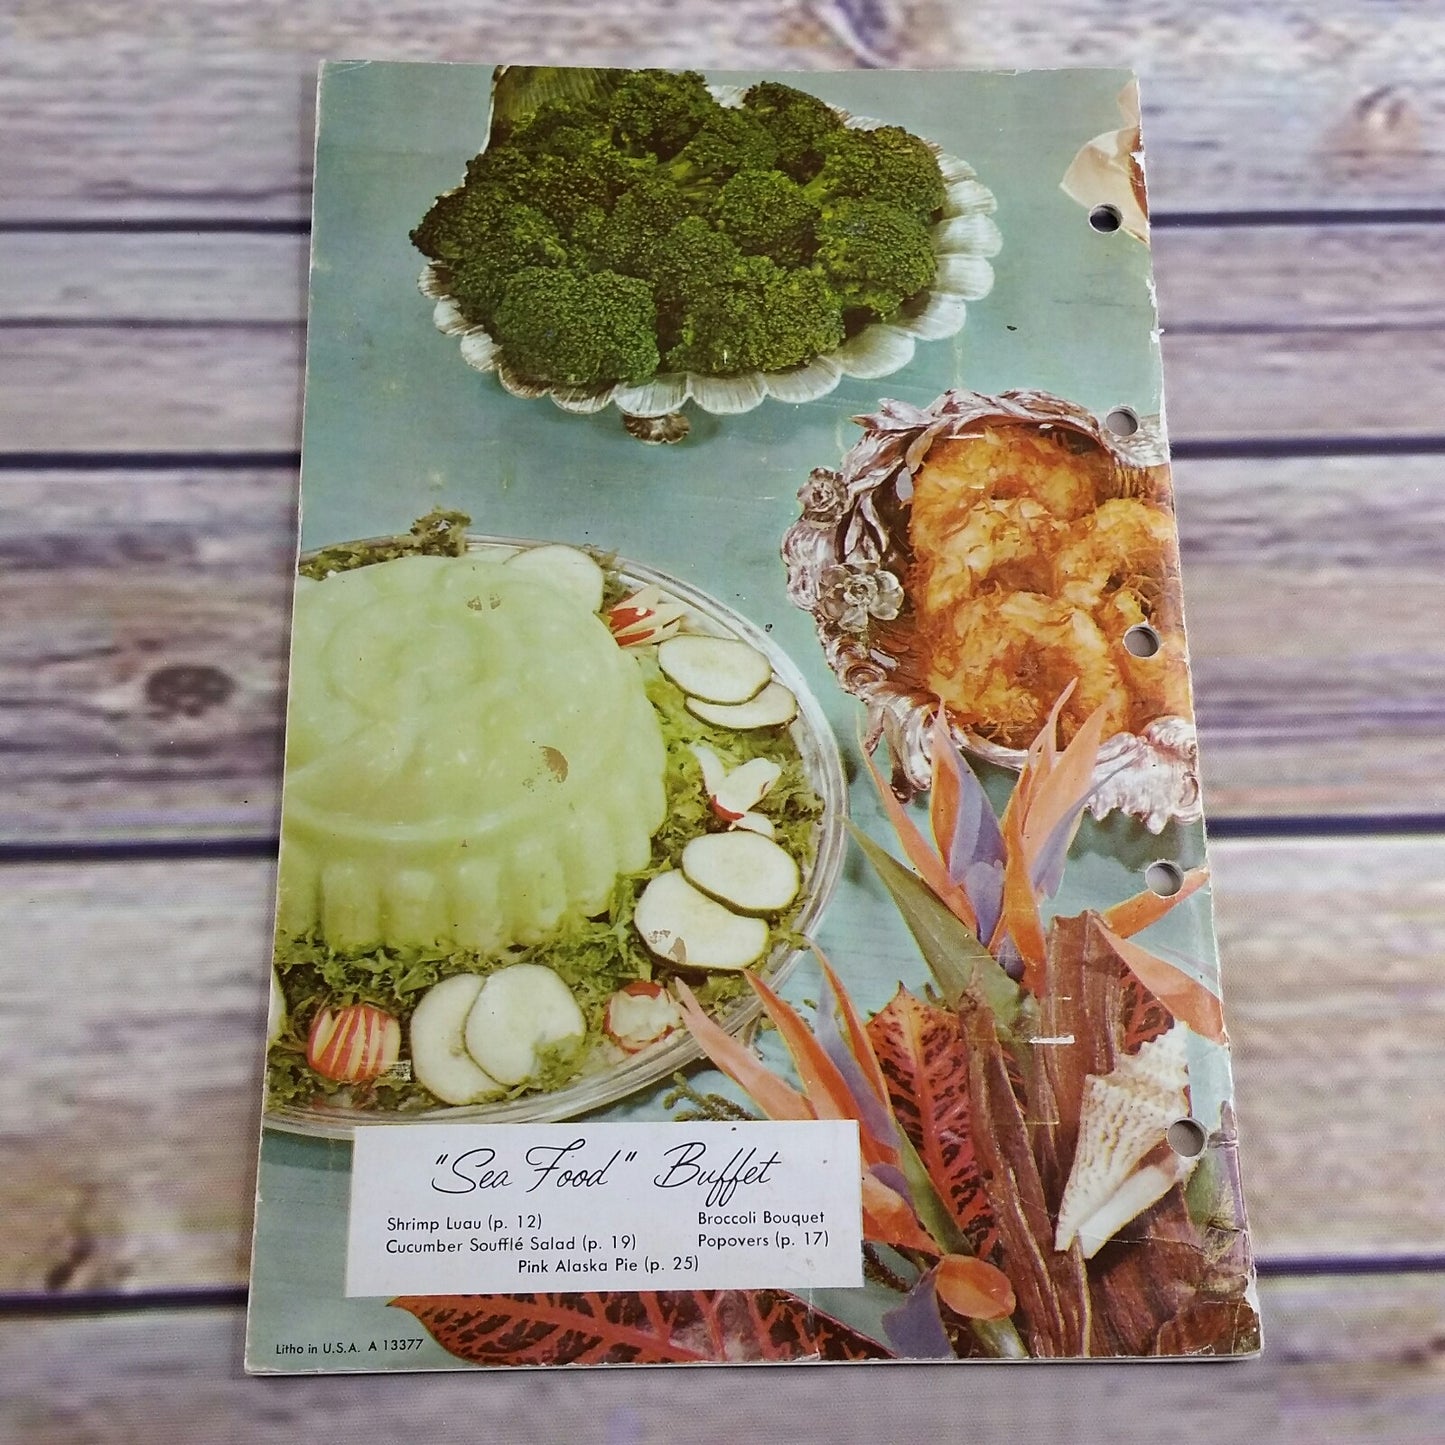 Vintage Cookbook Betty Crocker Frankly Fancy Foods Recipes Book 1959 Soft Cover Booklet Parties Desserts Main Dishes - At Grandma's Table